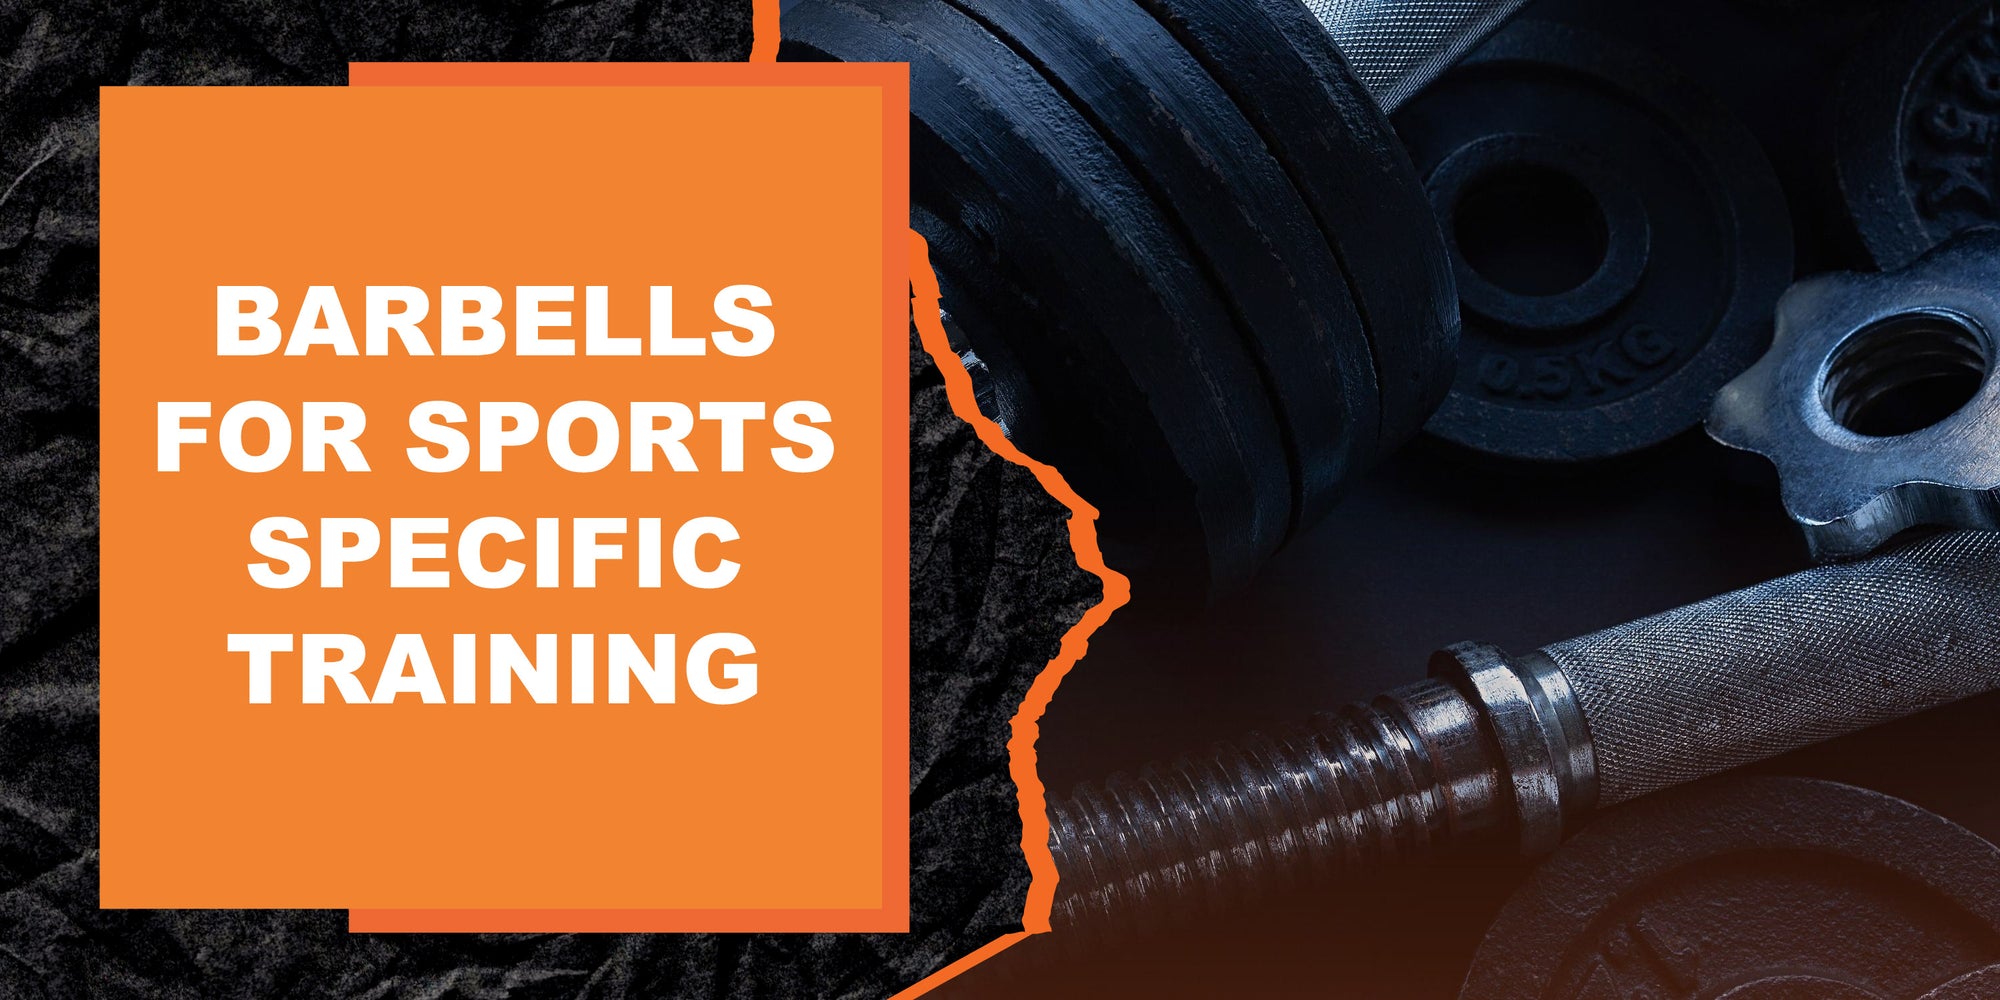 Barbells for Sports Specific Training